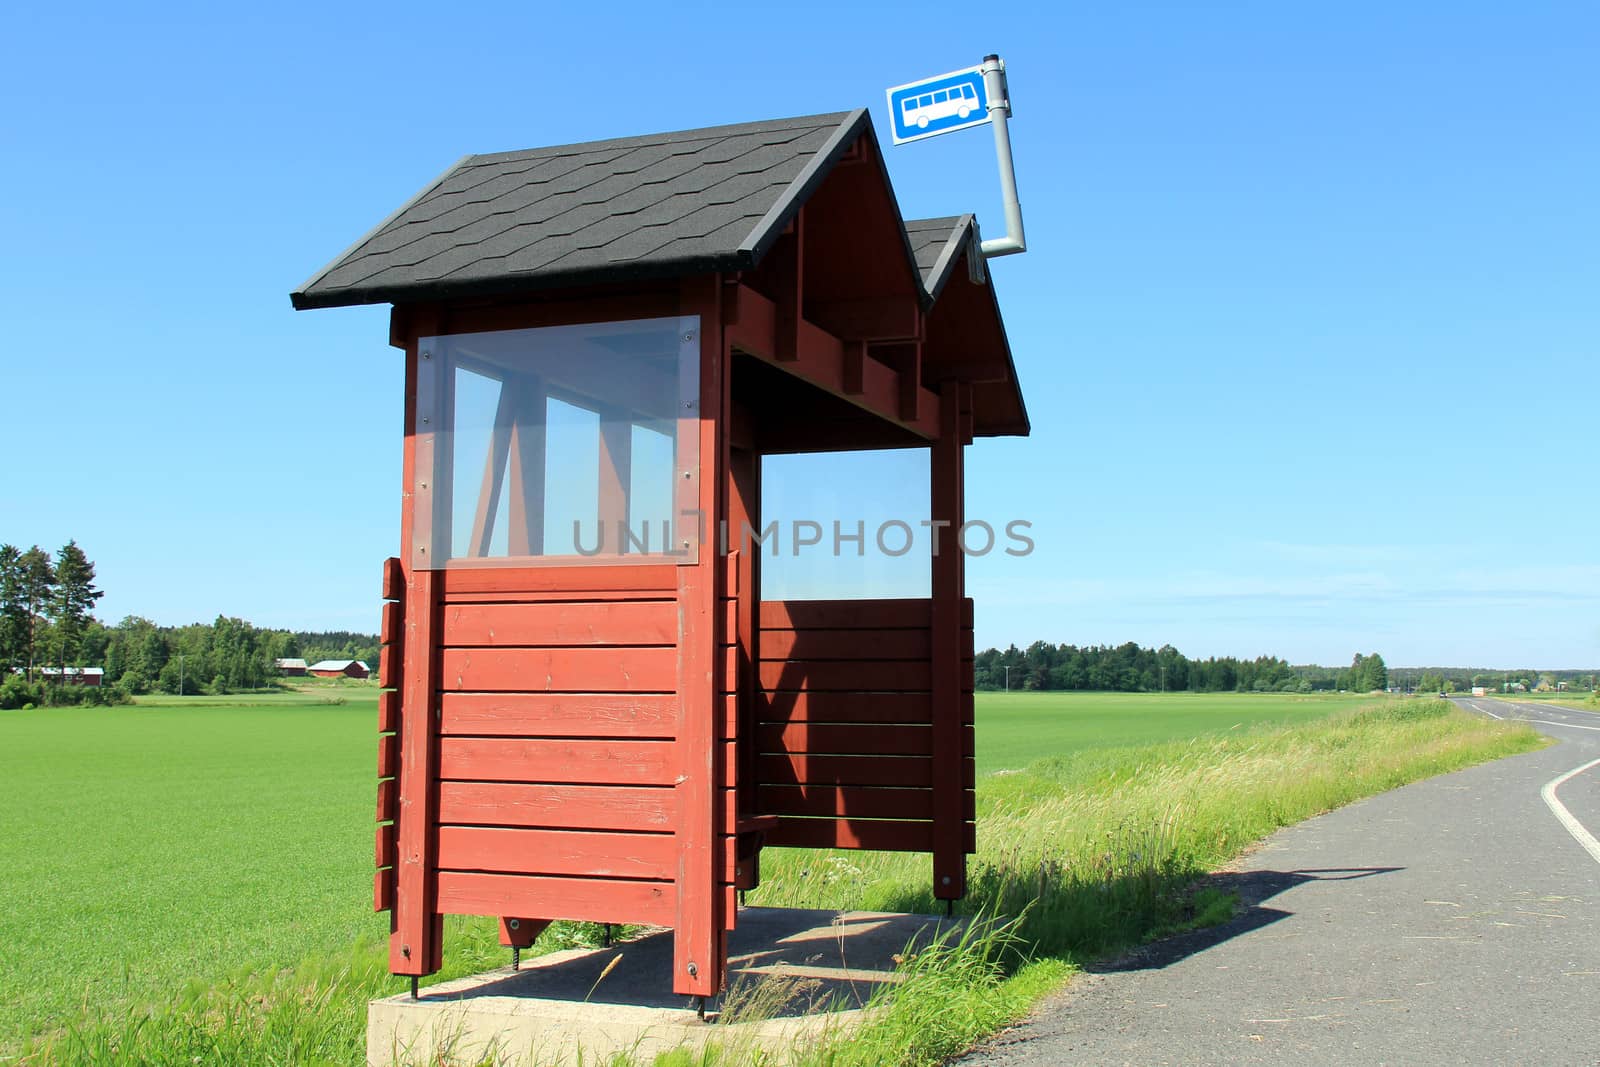 Rural bus stop shelter made of wood and painted red by highway on a sunny day at summer. Space for your advertisement.